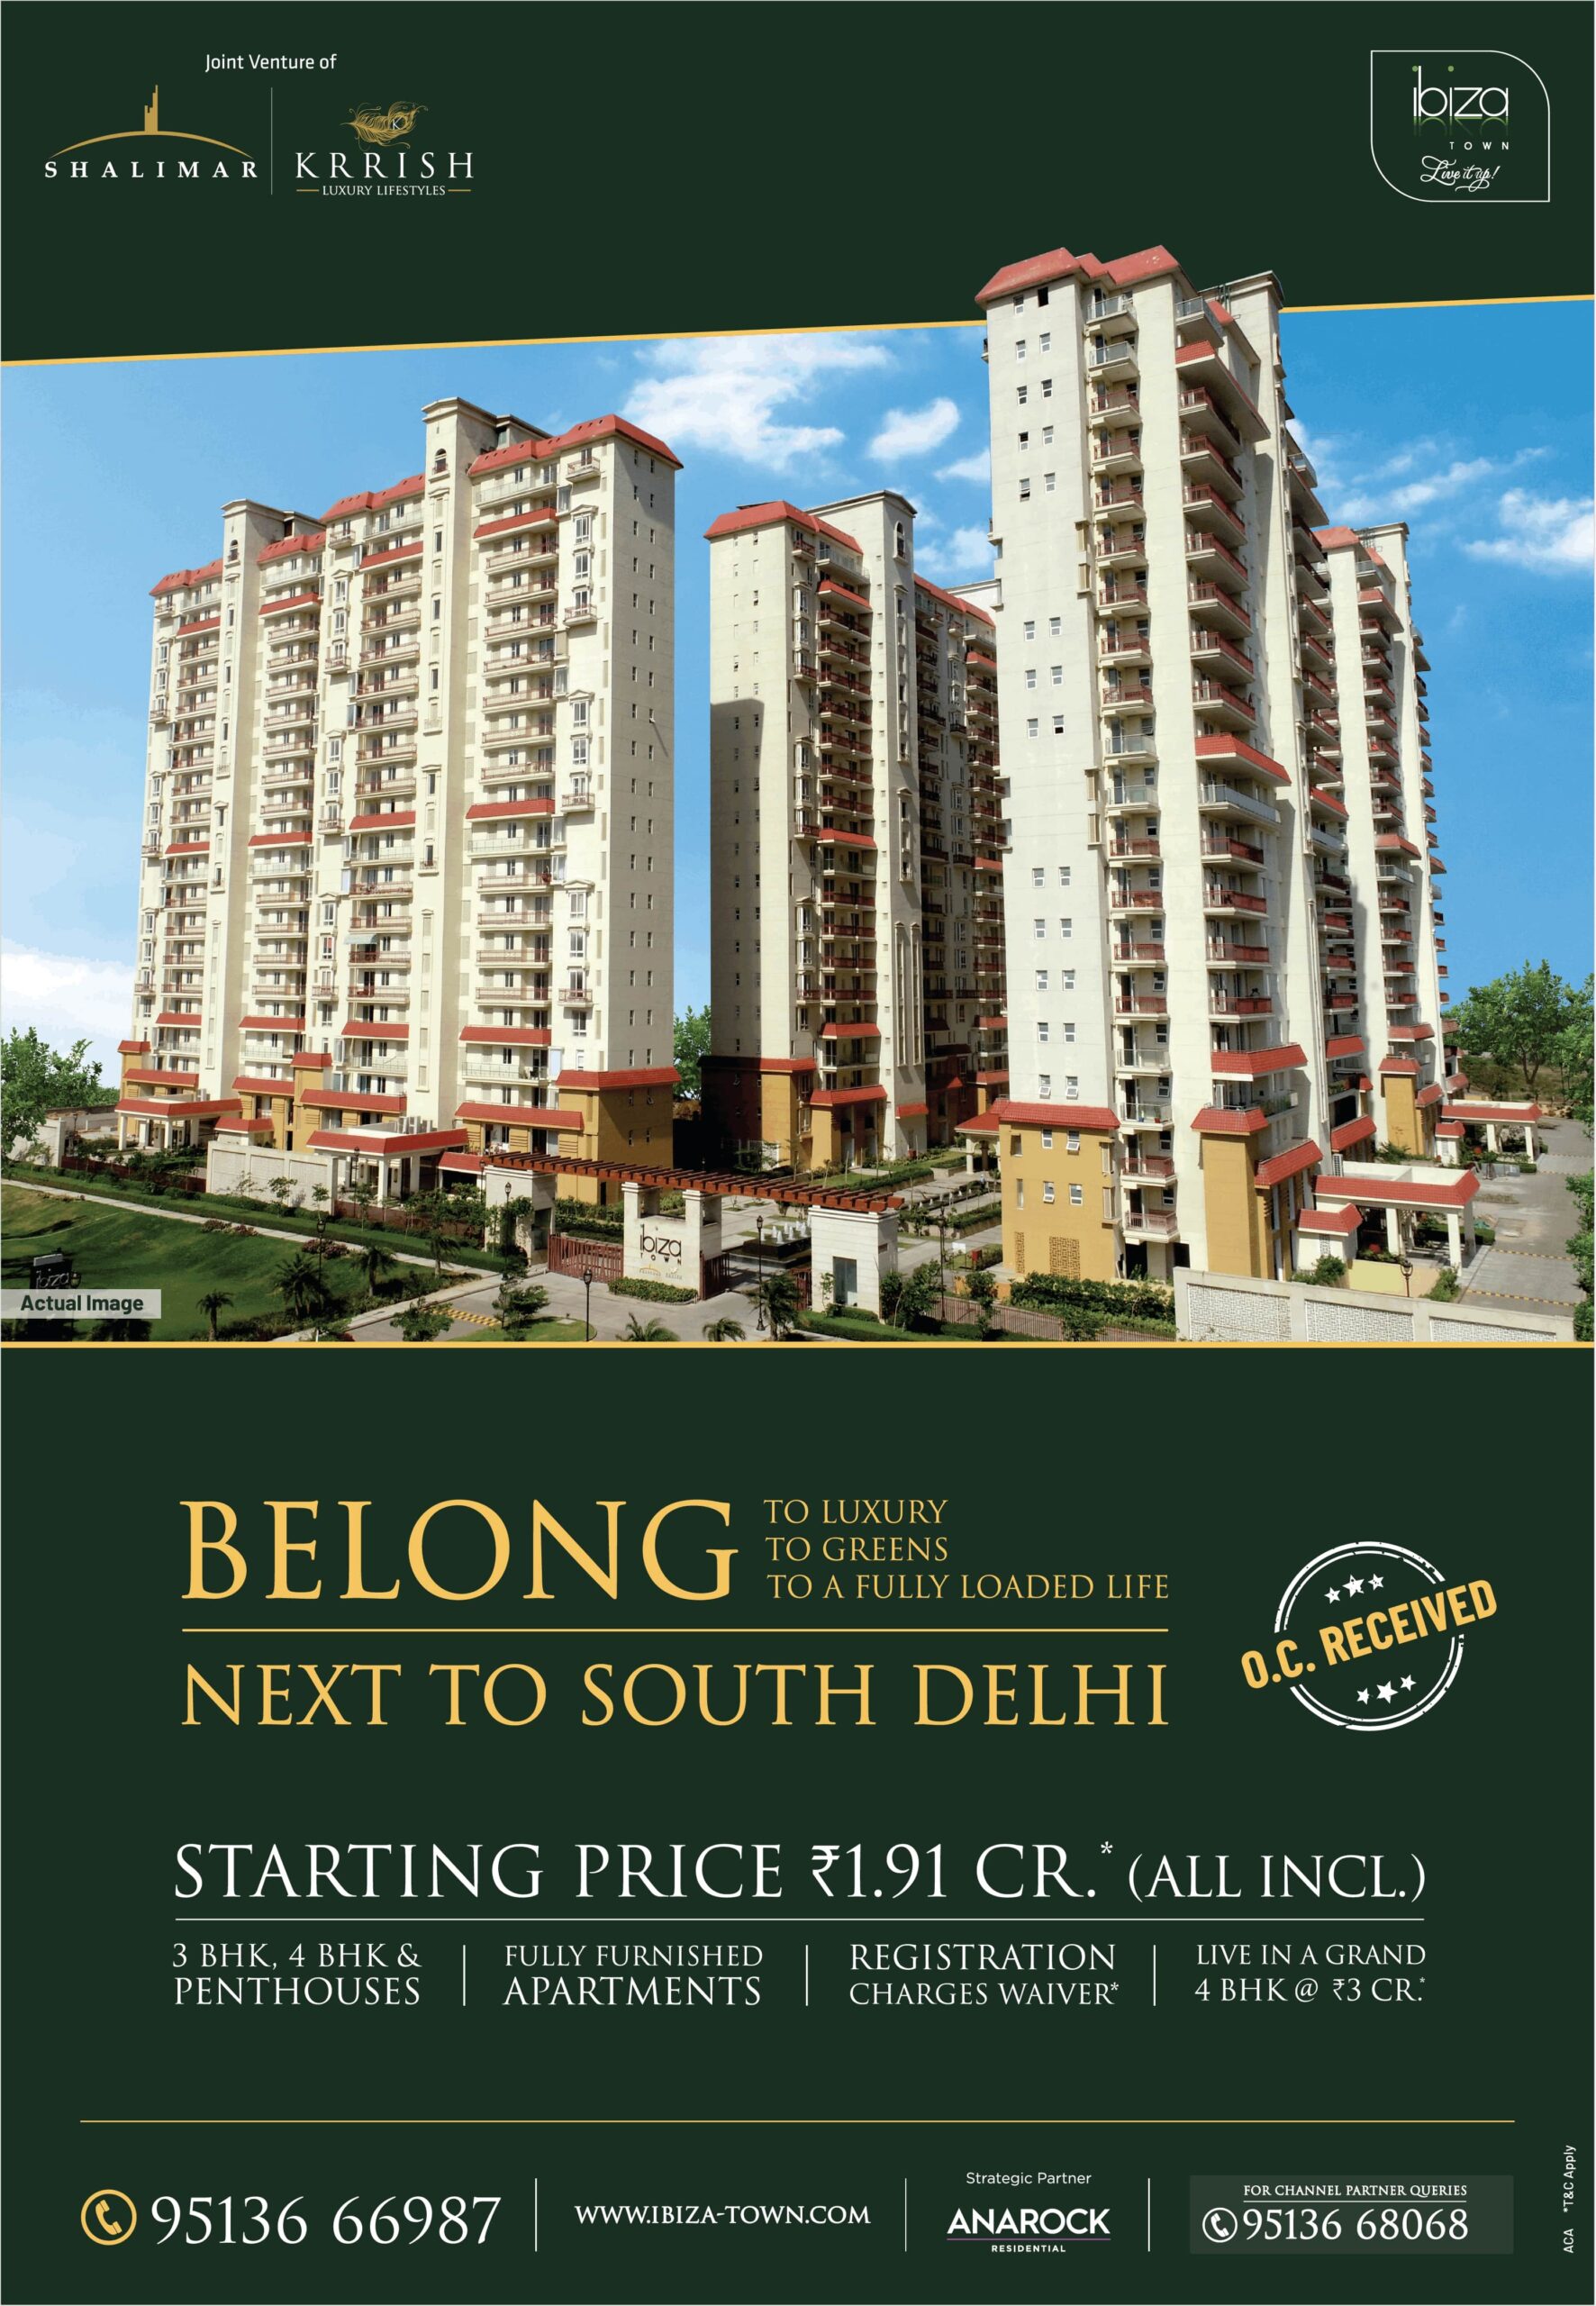 shalimar-krrish-belong-to-luxury-to-greens-to-a-fully-loaded-life-next-to-south-delhi-ad-delhi-times-03-07-2021